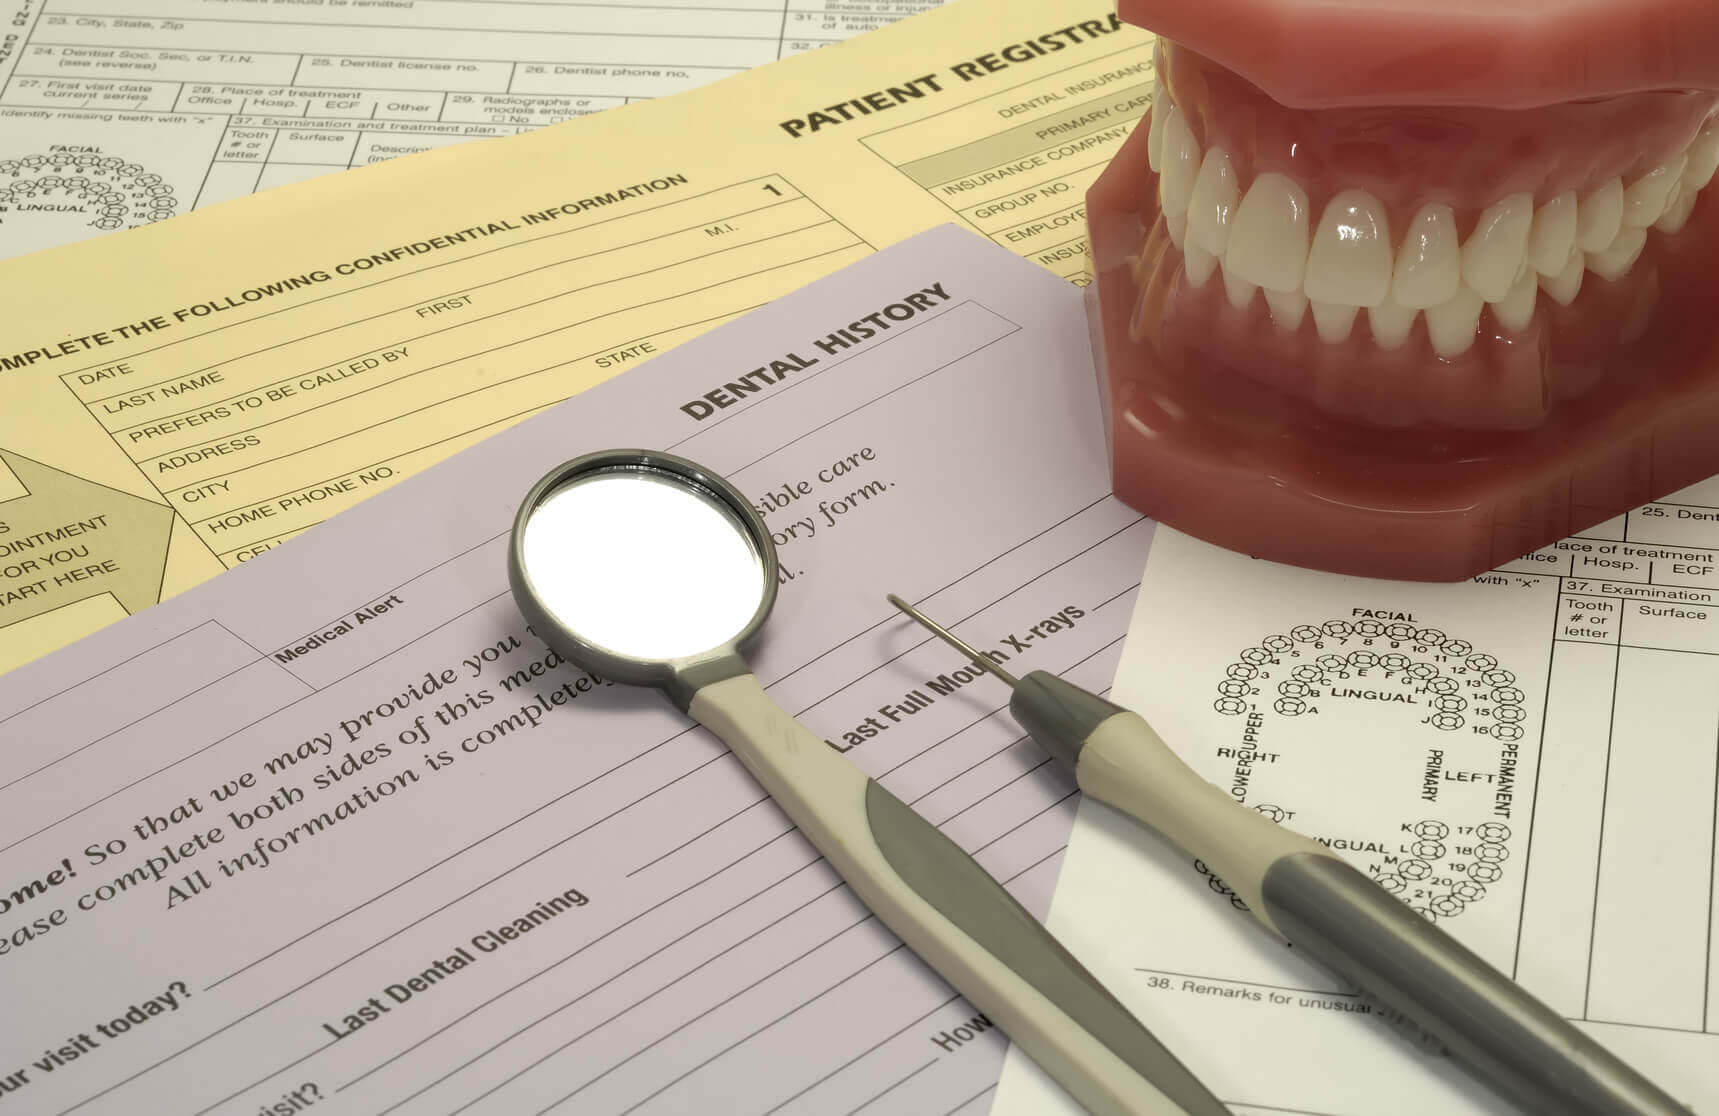 calgary dental benefits with dental instruments and mouth display model on paperwork